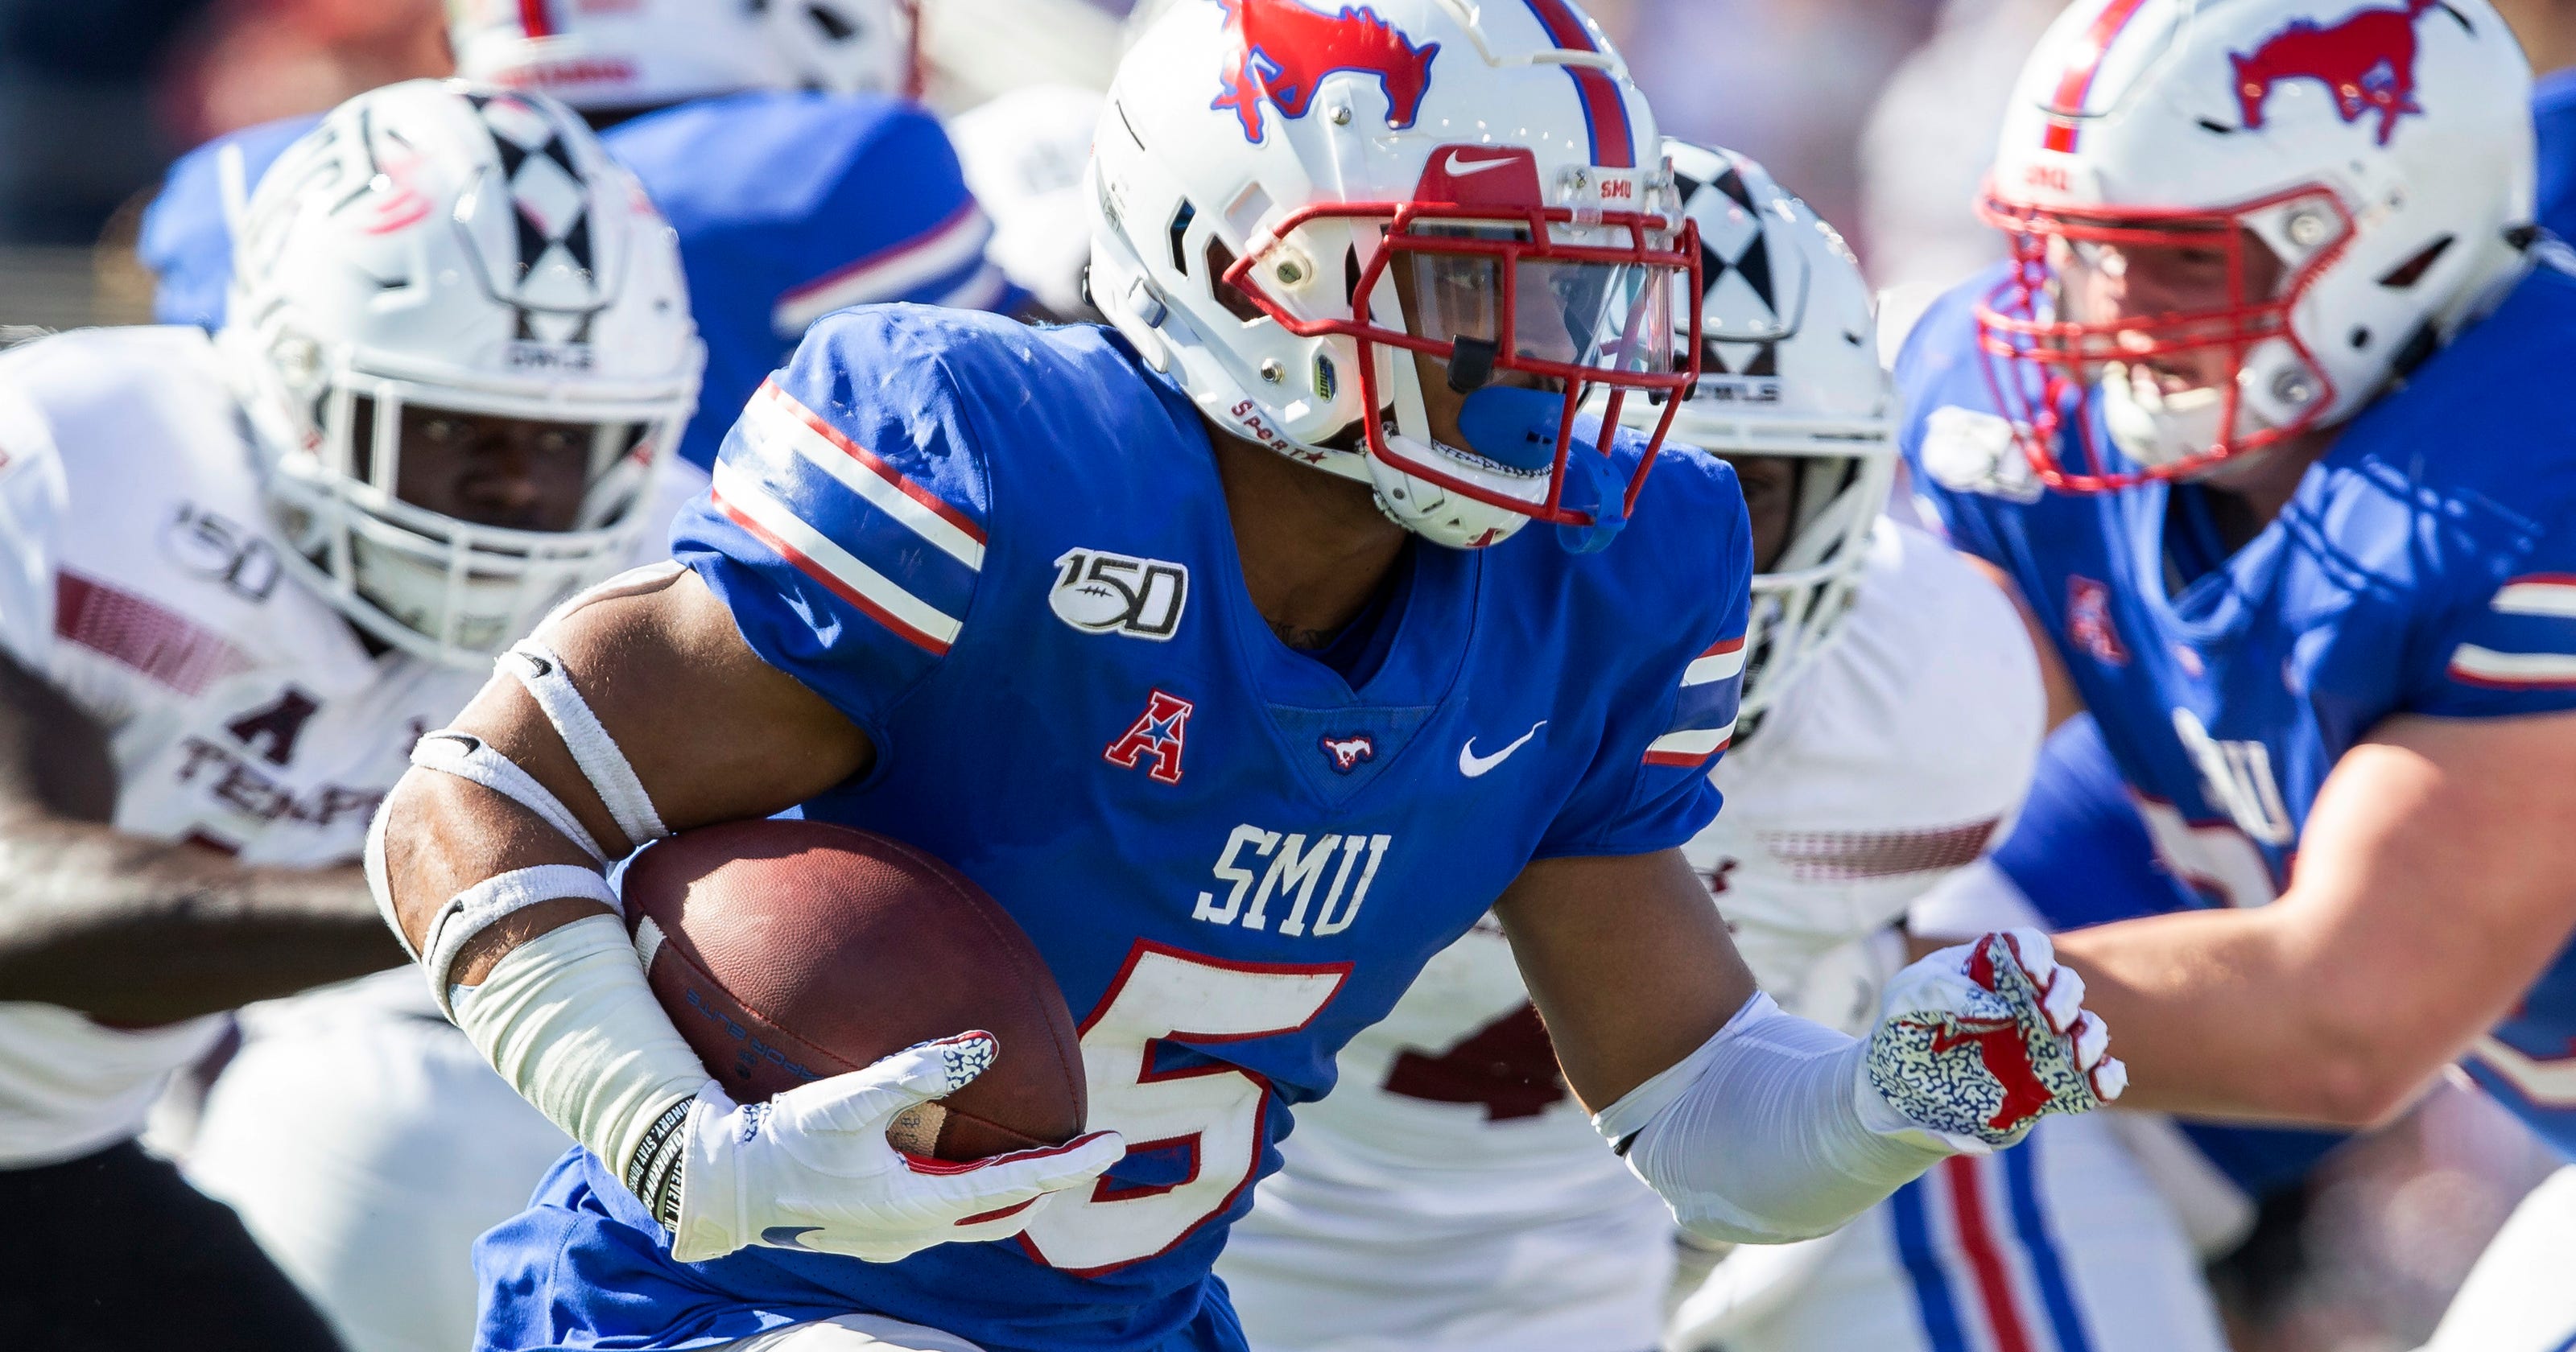 SMU football back in the national spotlight after years of struggling